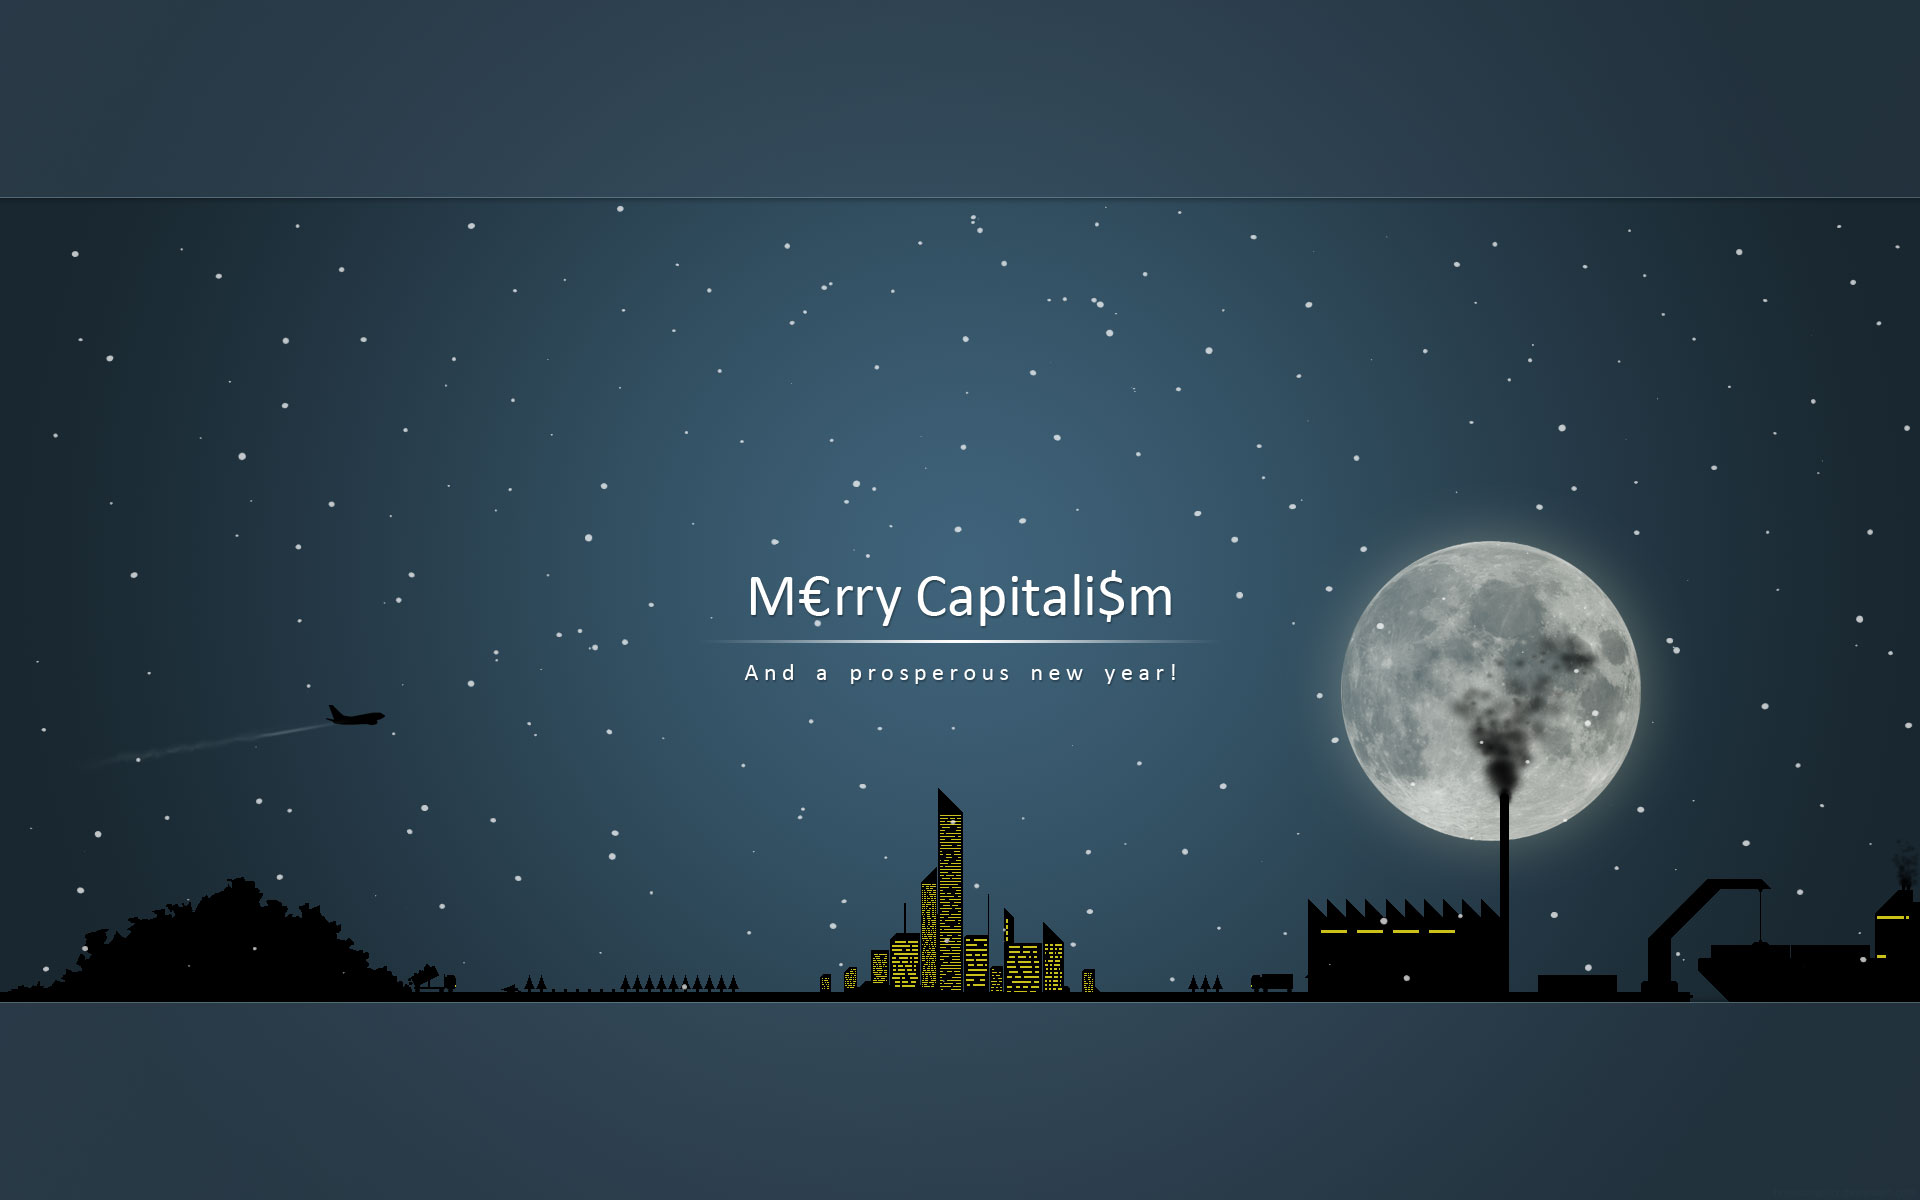 Christmas Wallpaper For Your Pc Desktop Video Ing